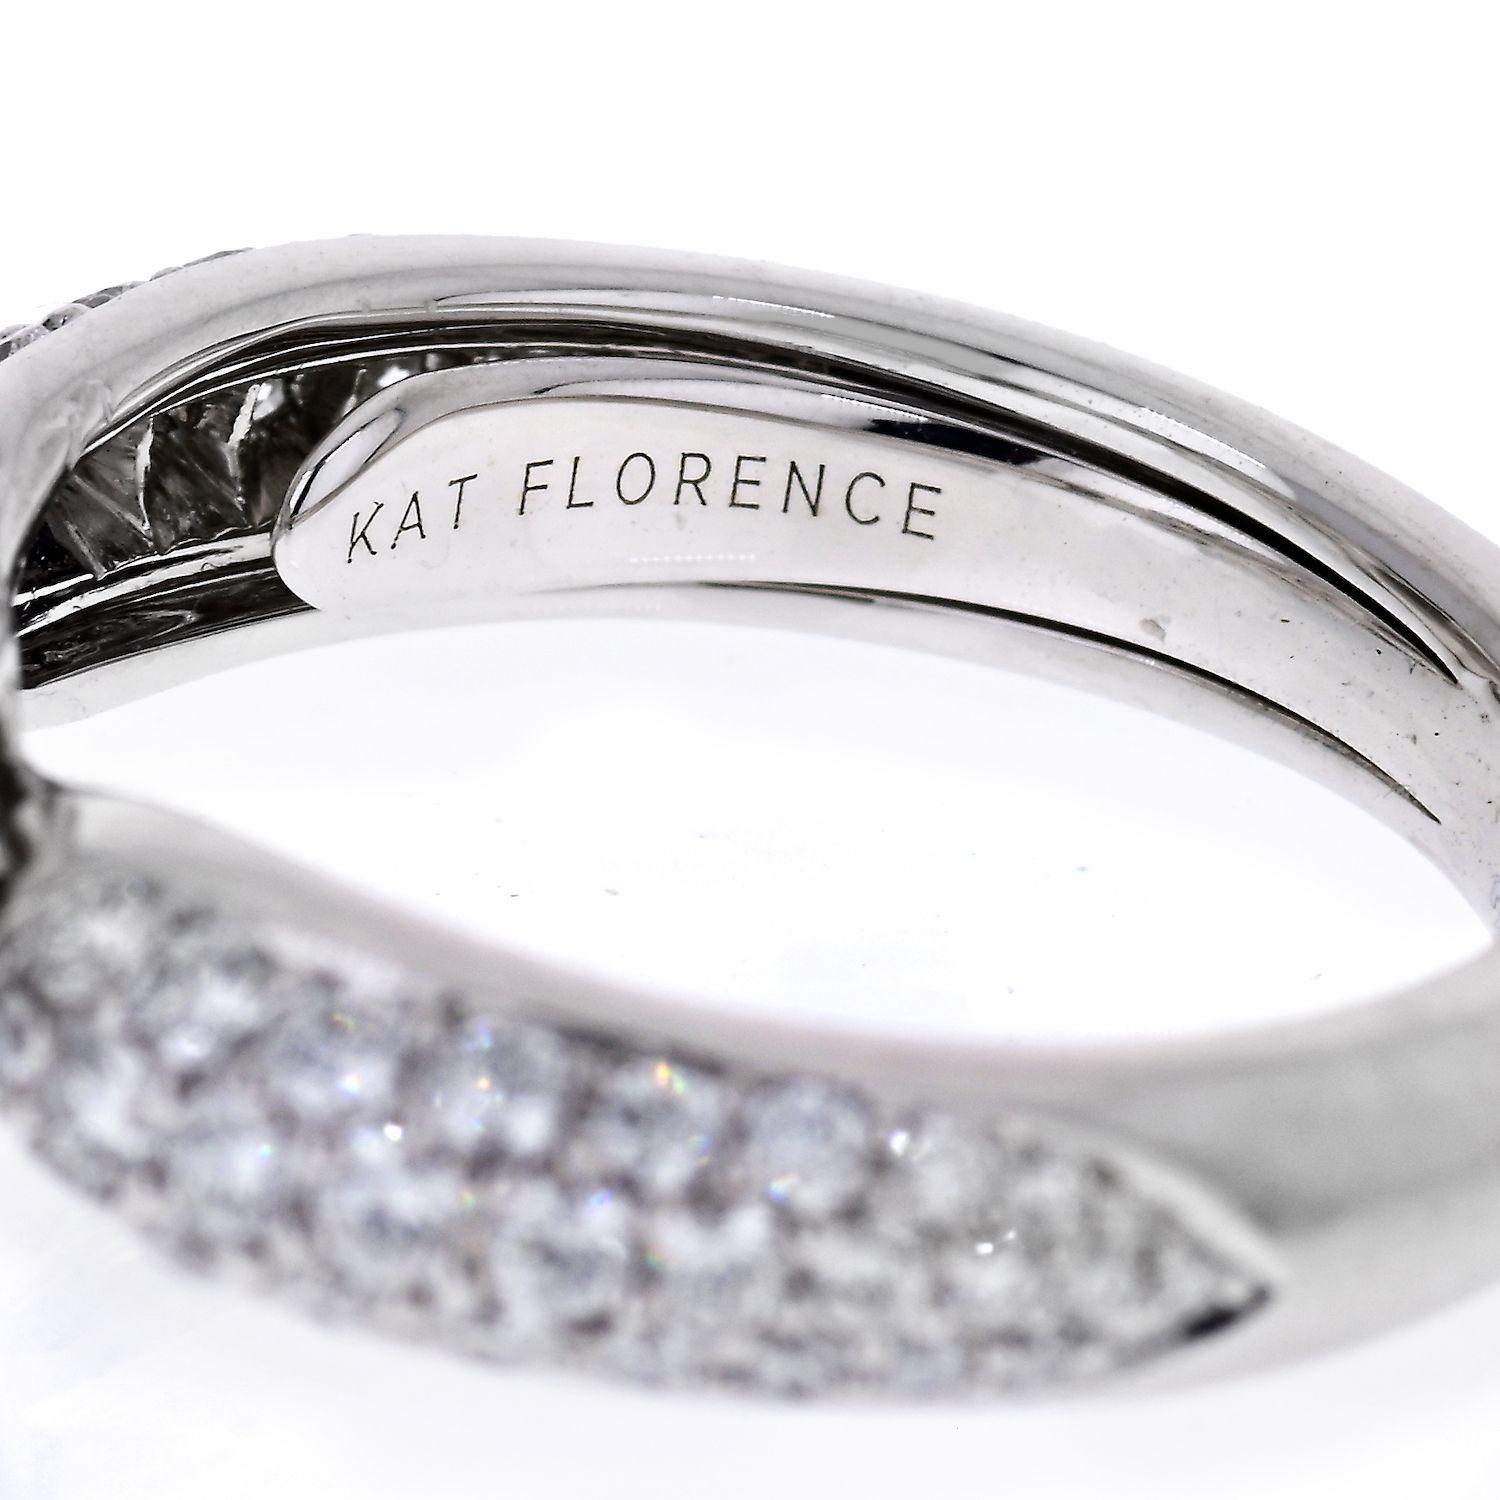 kat florence ring for sale